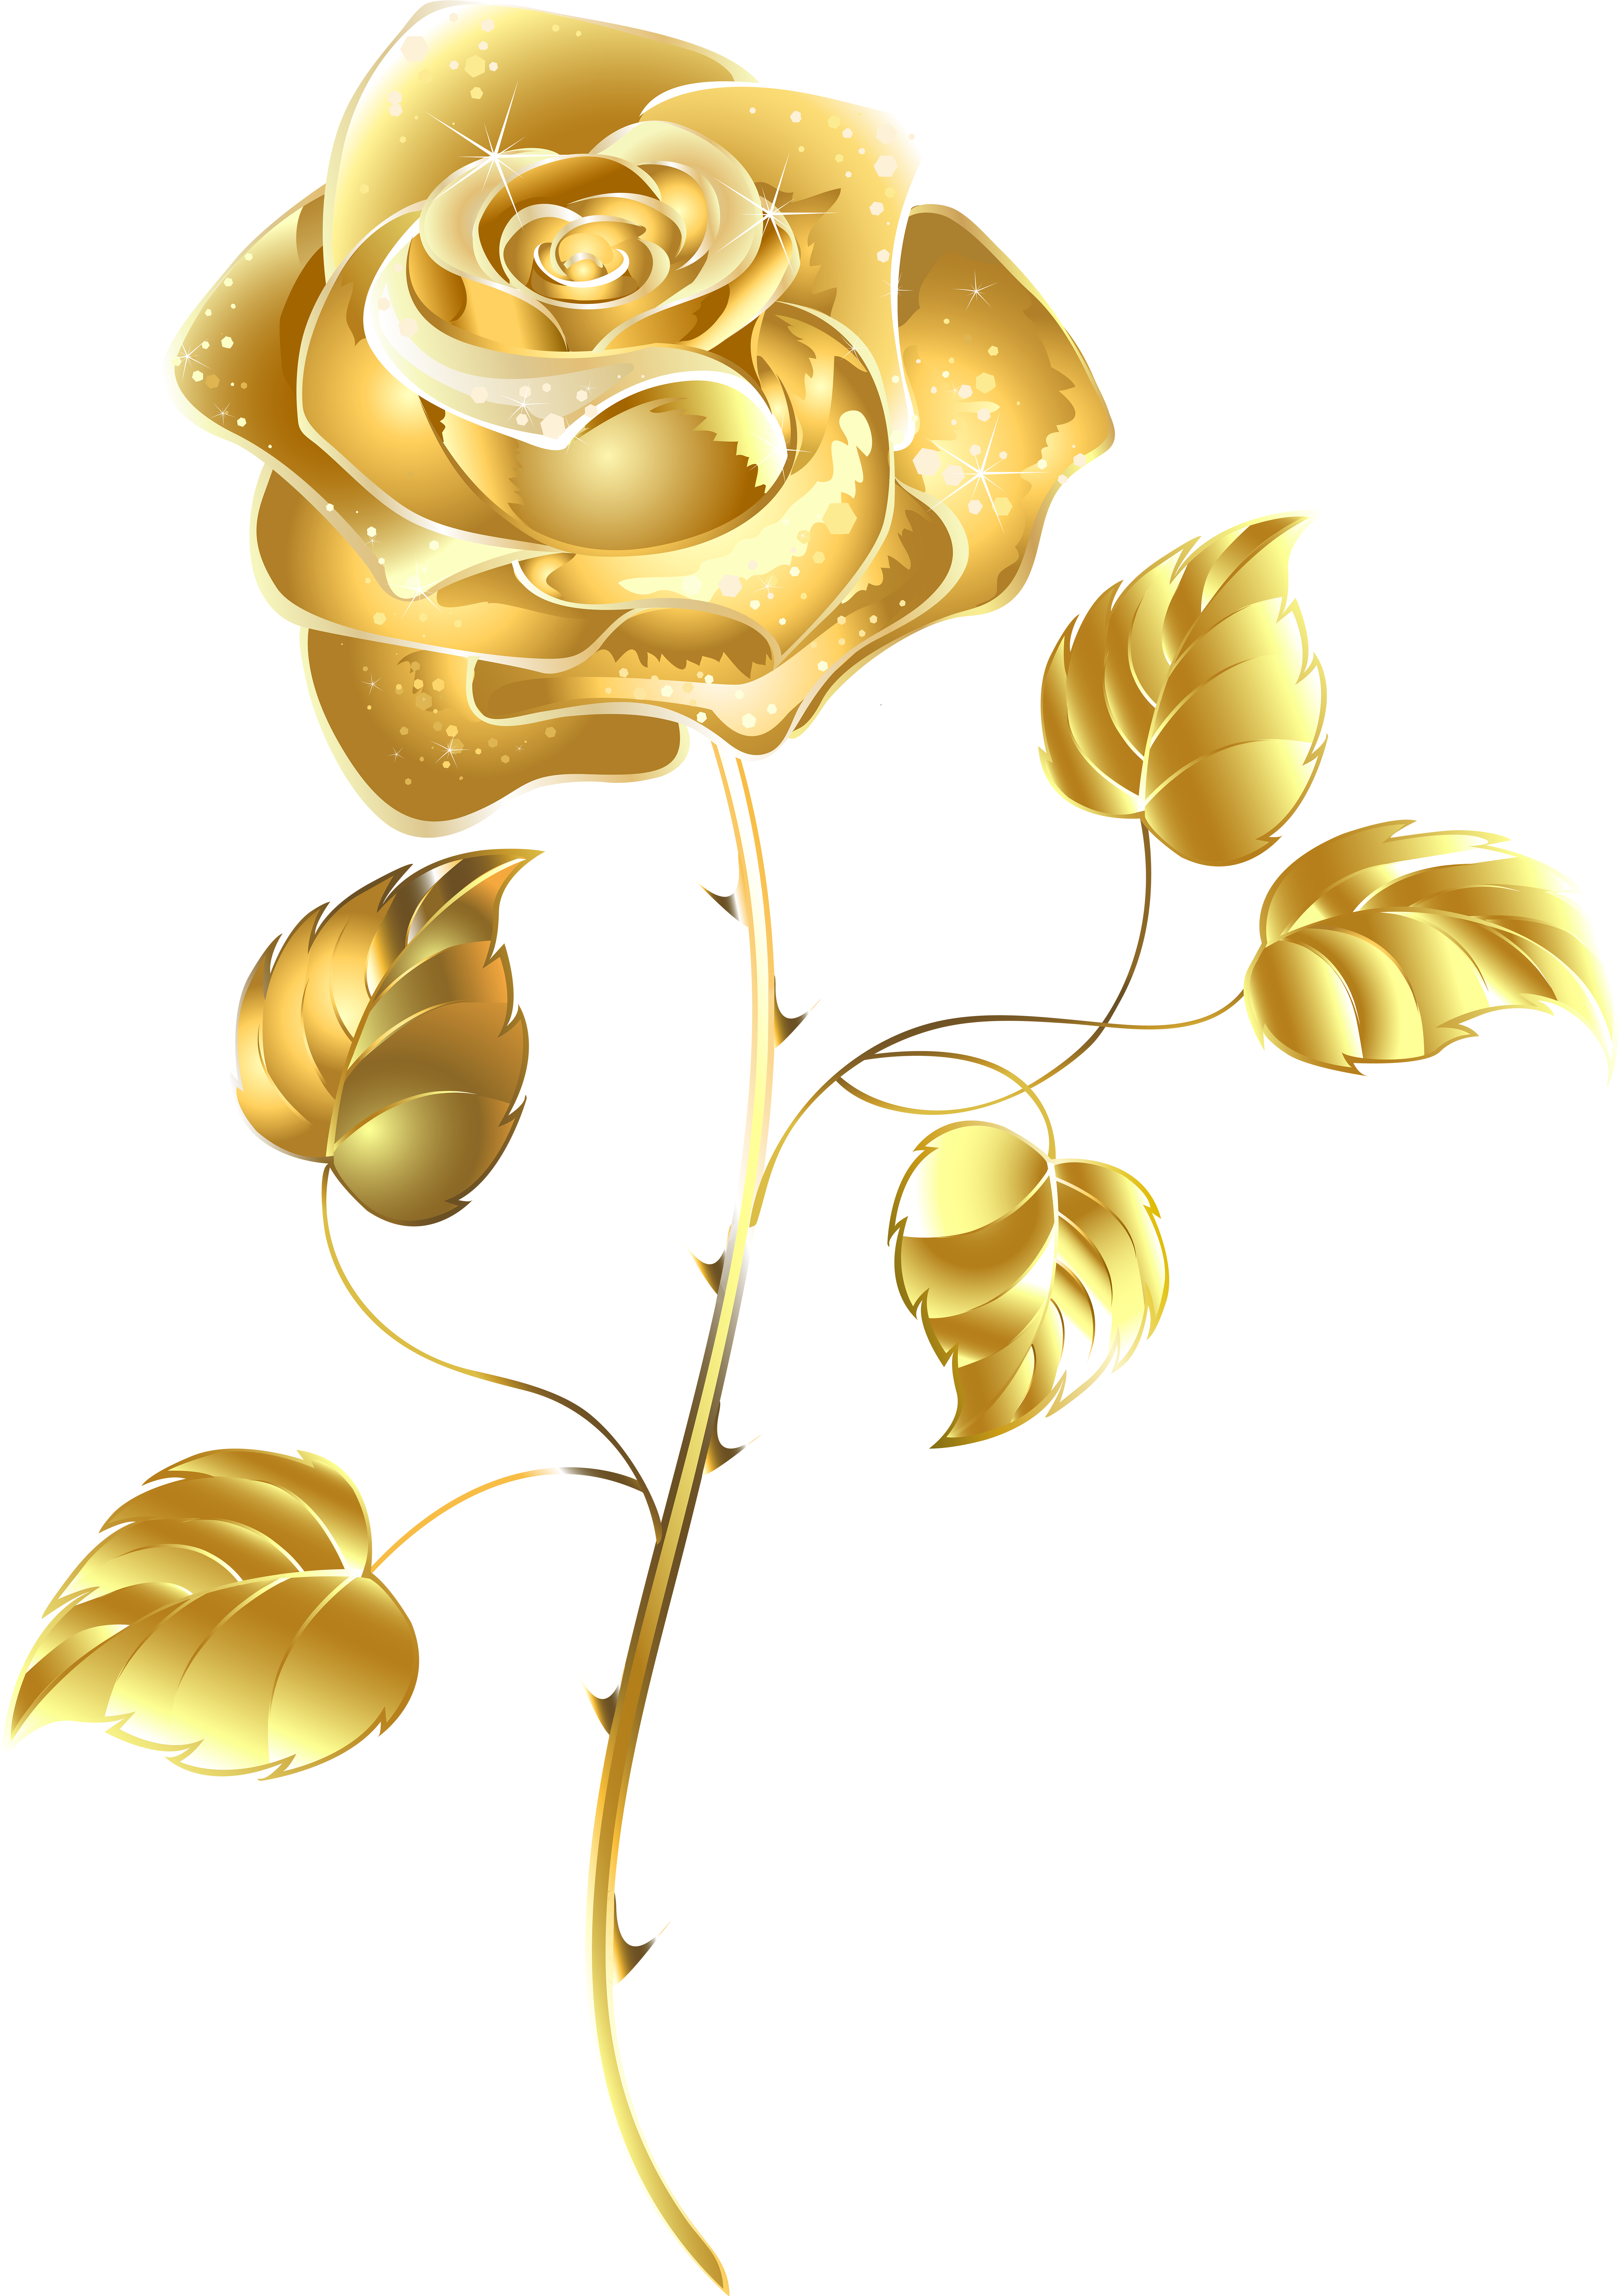 Beautiful Gold Rose Png Clip Art Image Clip Art Library - Beautiful Gold Rose Png Clip Art Image Clip Art Library (5638x8000)